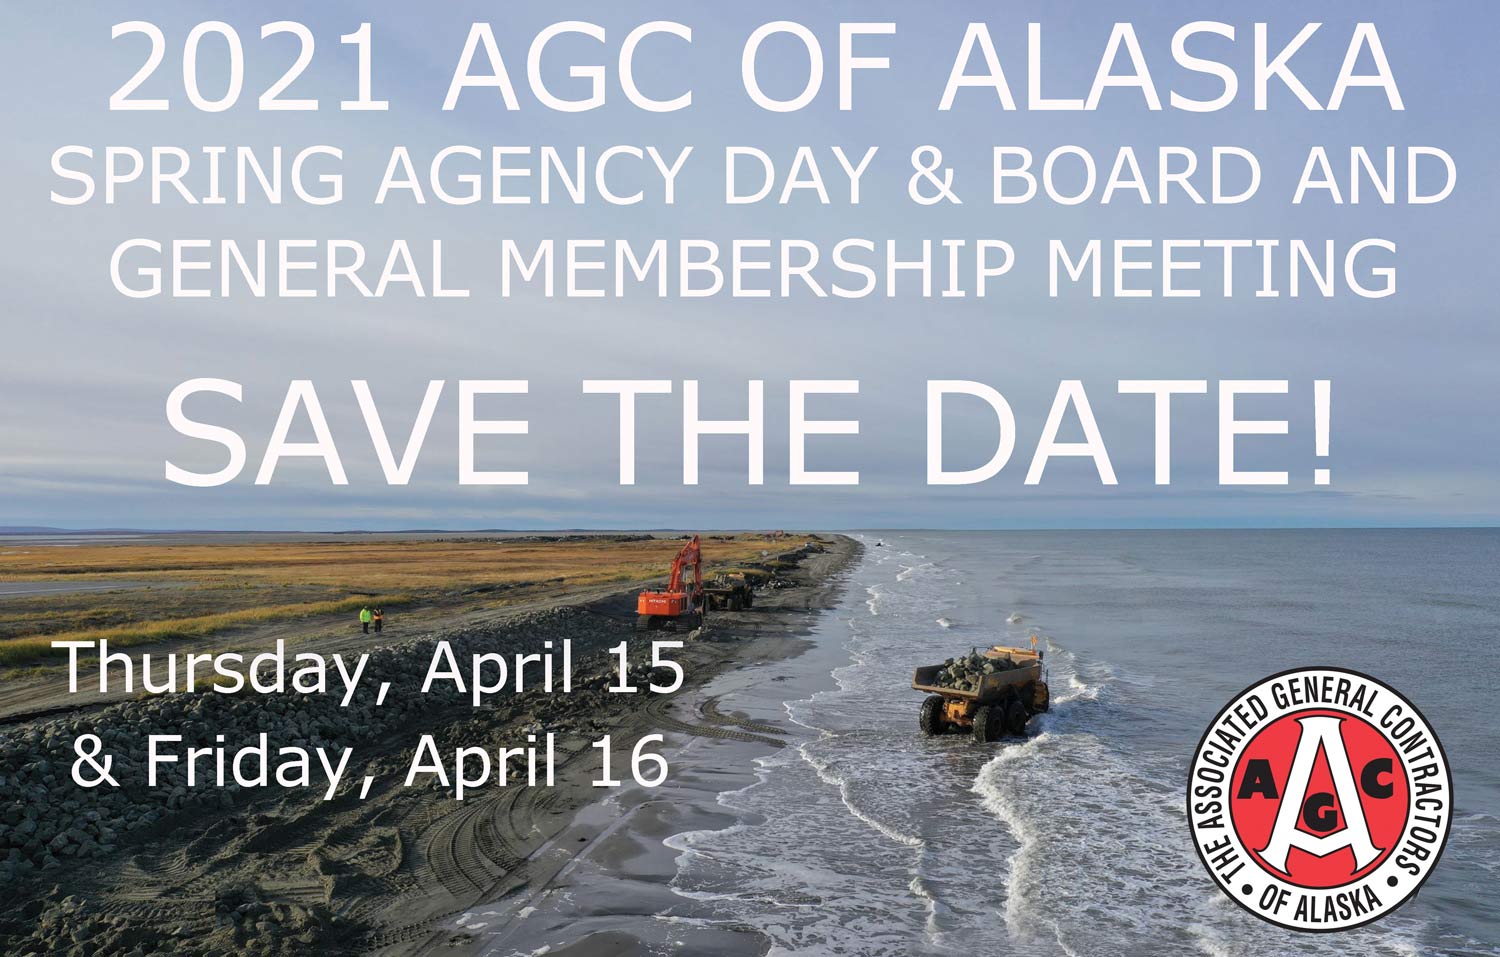 2021 AGC Spring Agency Day & Board and General Membership Meeting Advertisement